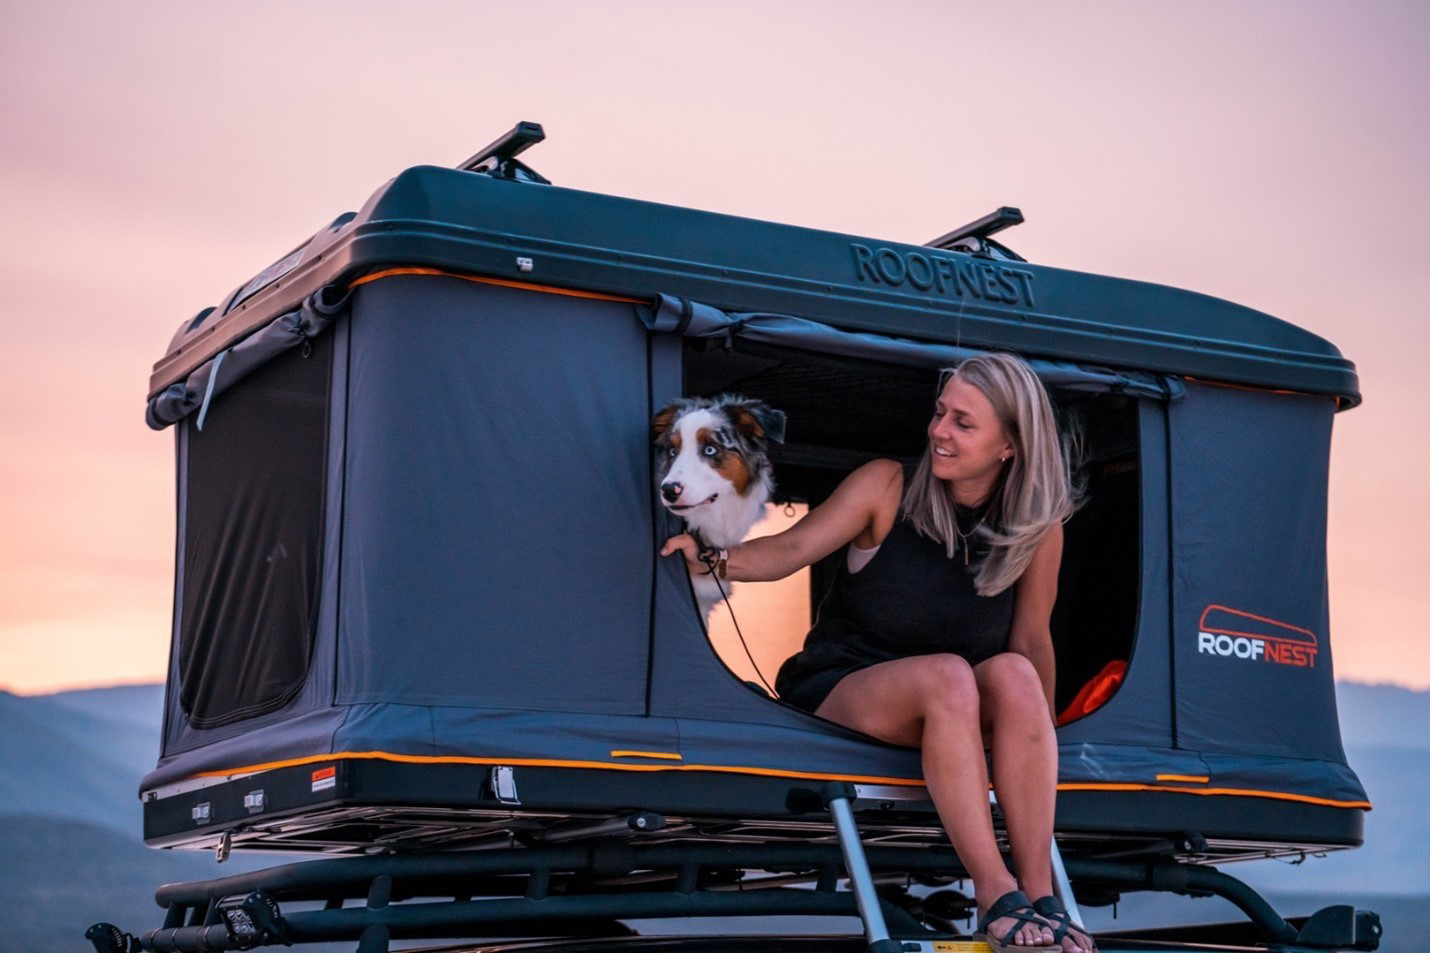 Roofnest Sparrow Adventure unfolded with a dog and person